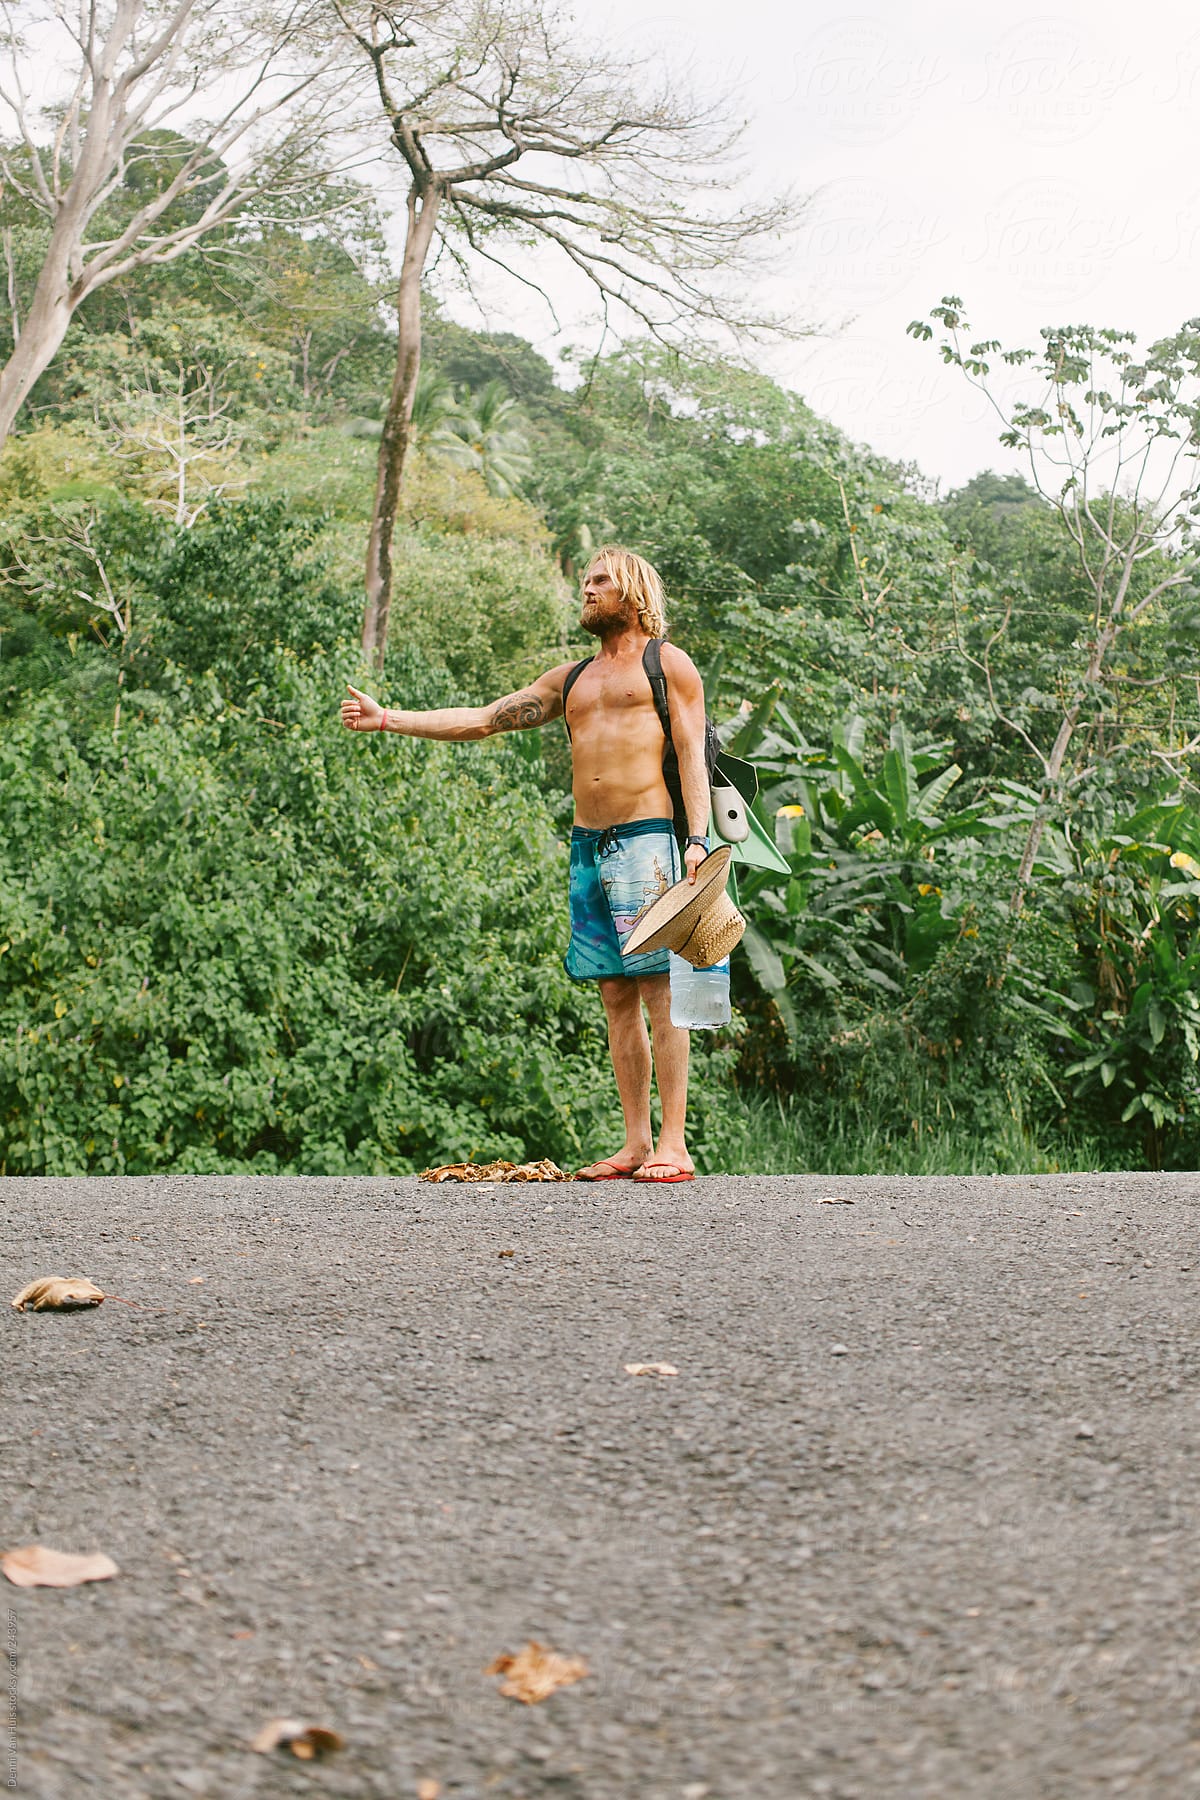 Man with no shirt on hitchhiking on the side of the road.